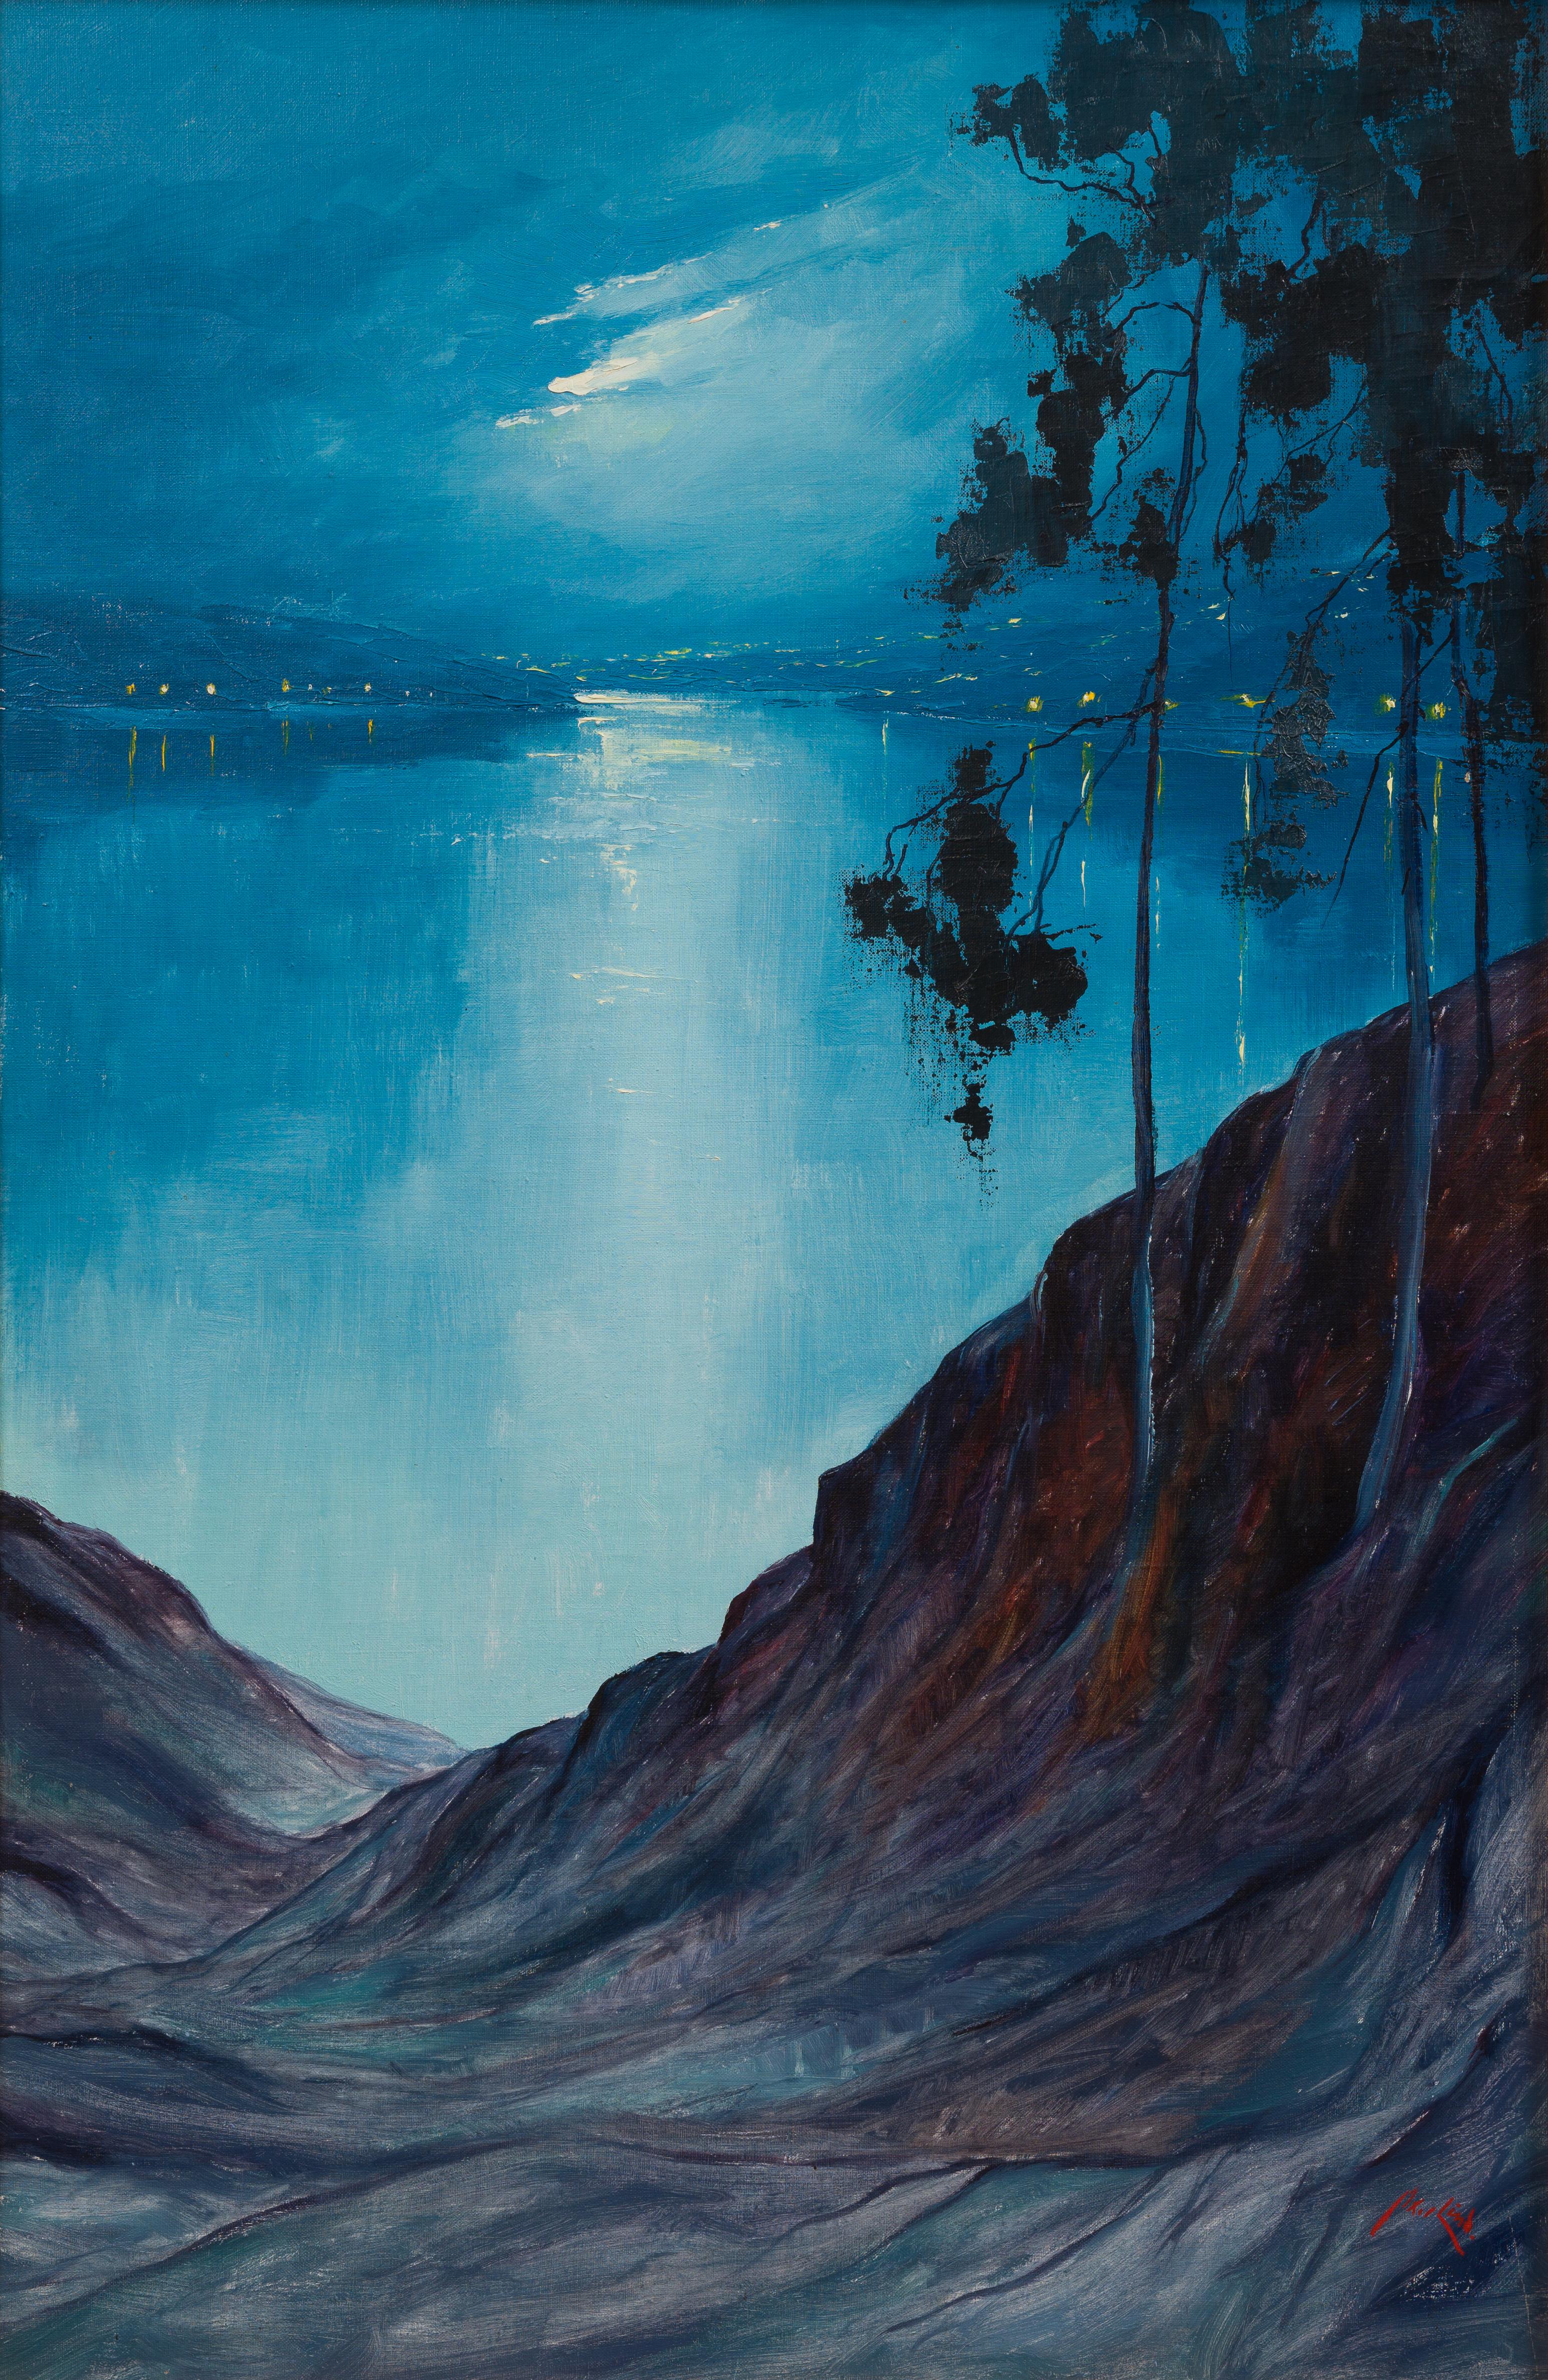 Axel Lind Figurative Painting - Midnight Reflections From the Artist Lidingö Studio